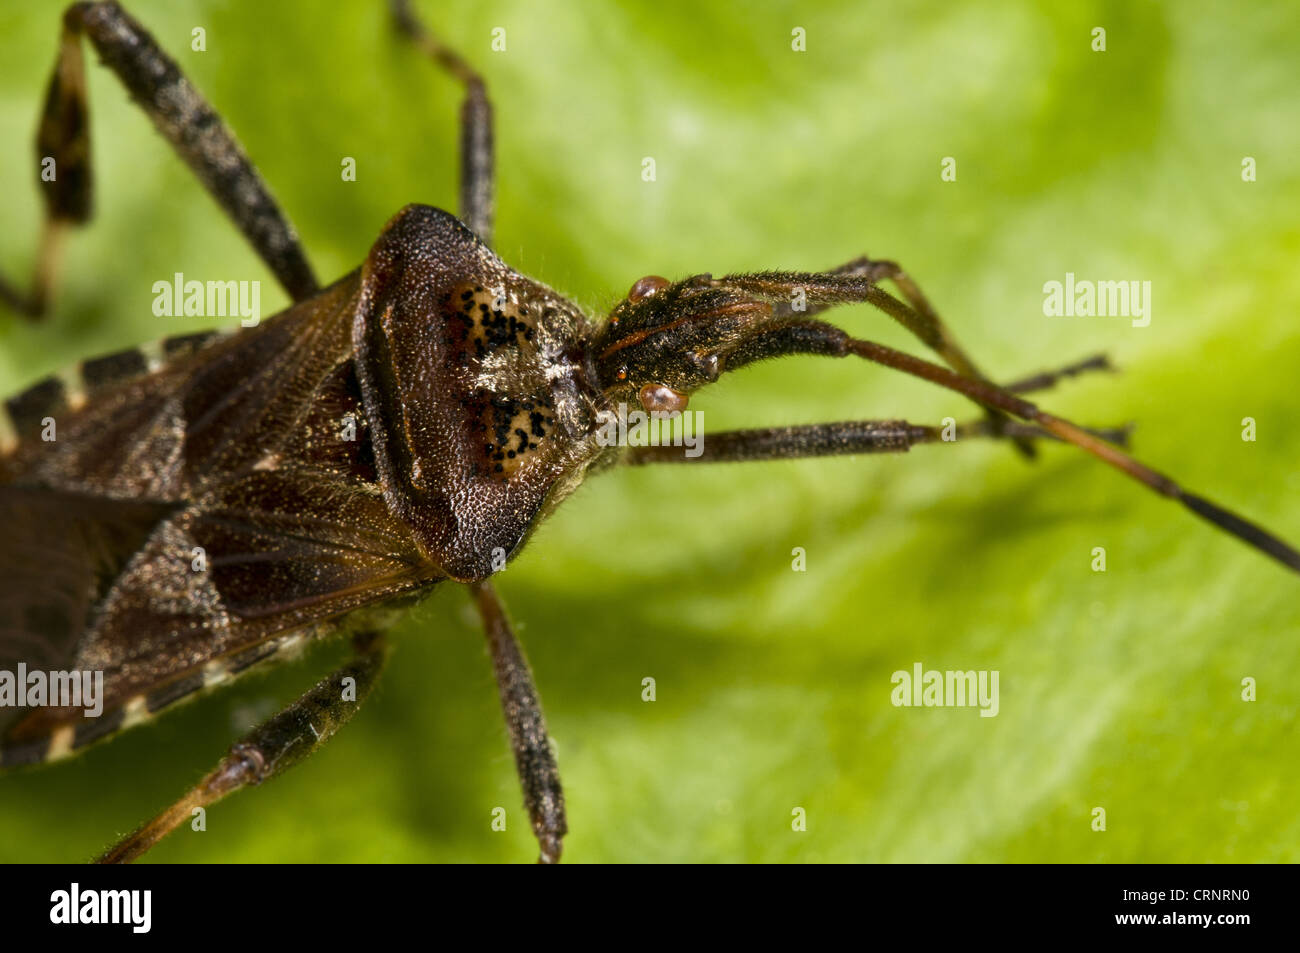 Western Conifer Seedbug (Leptoglossus occidentalis) introduced invasive species, adult, close-up of head, cleaning antennae Stock Photo